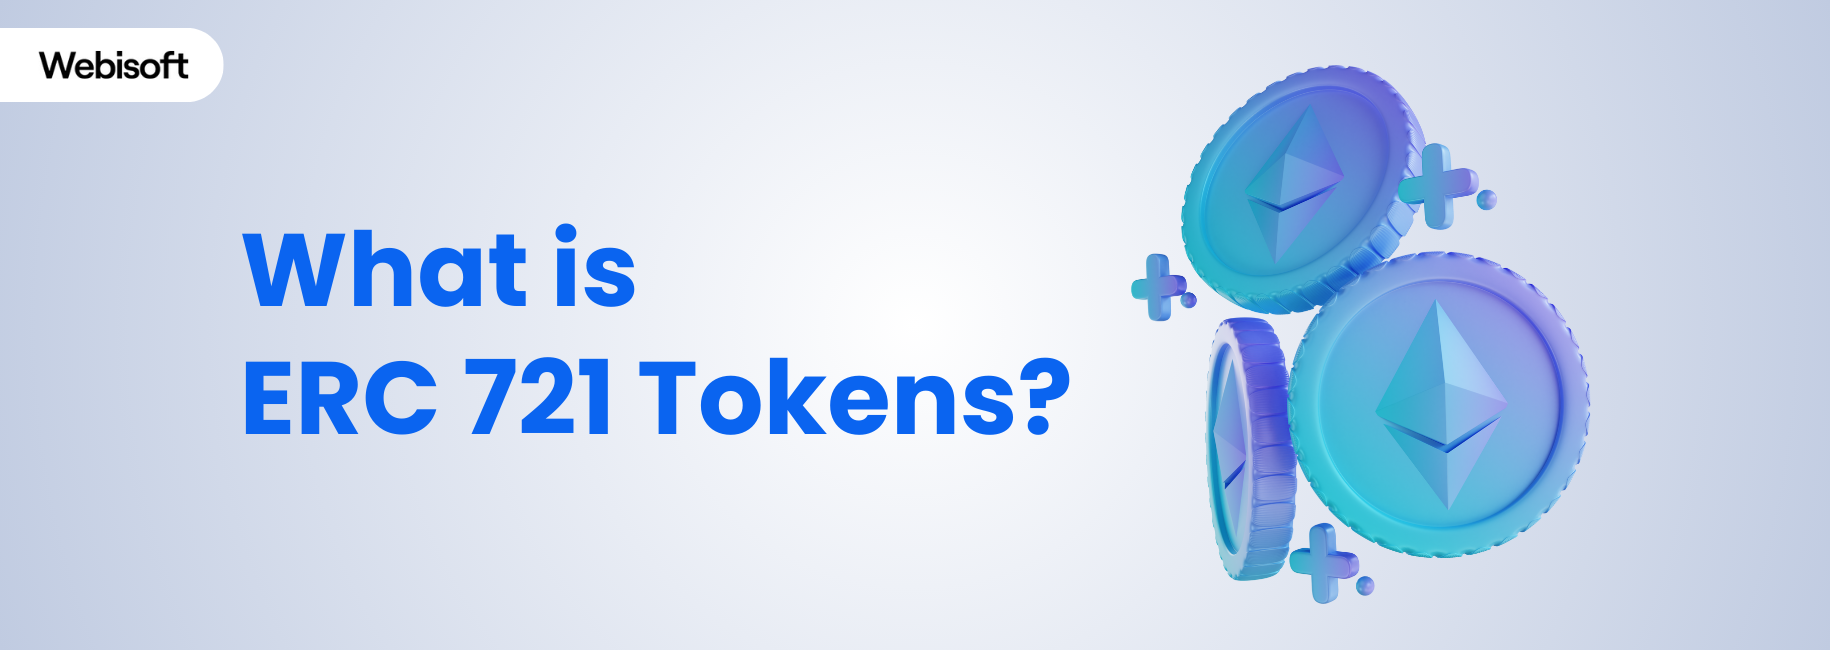 What is ERC 721 Tokens